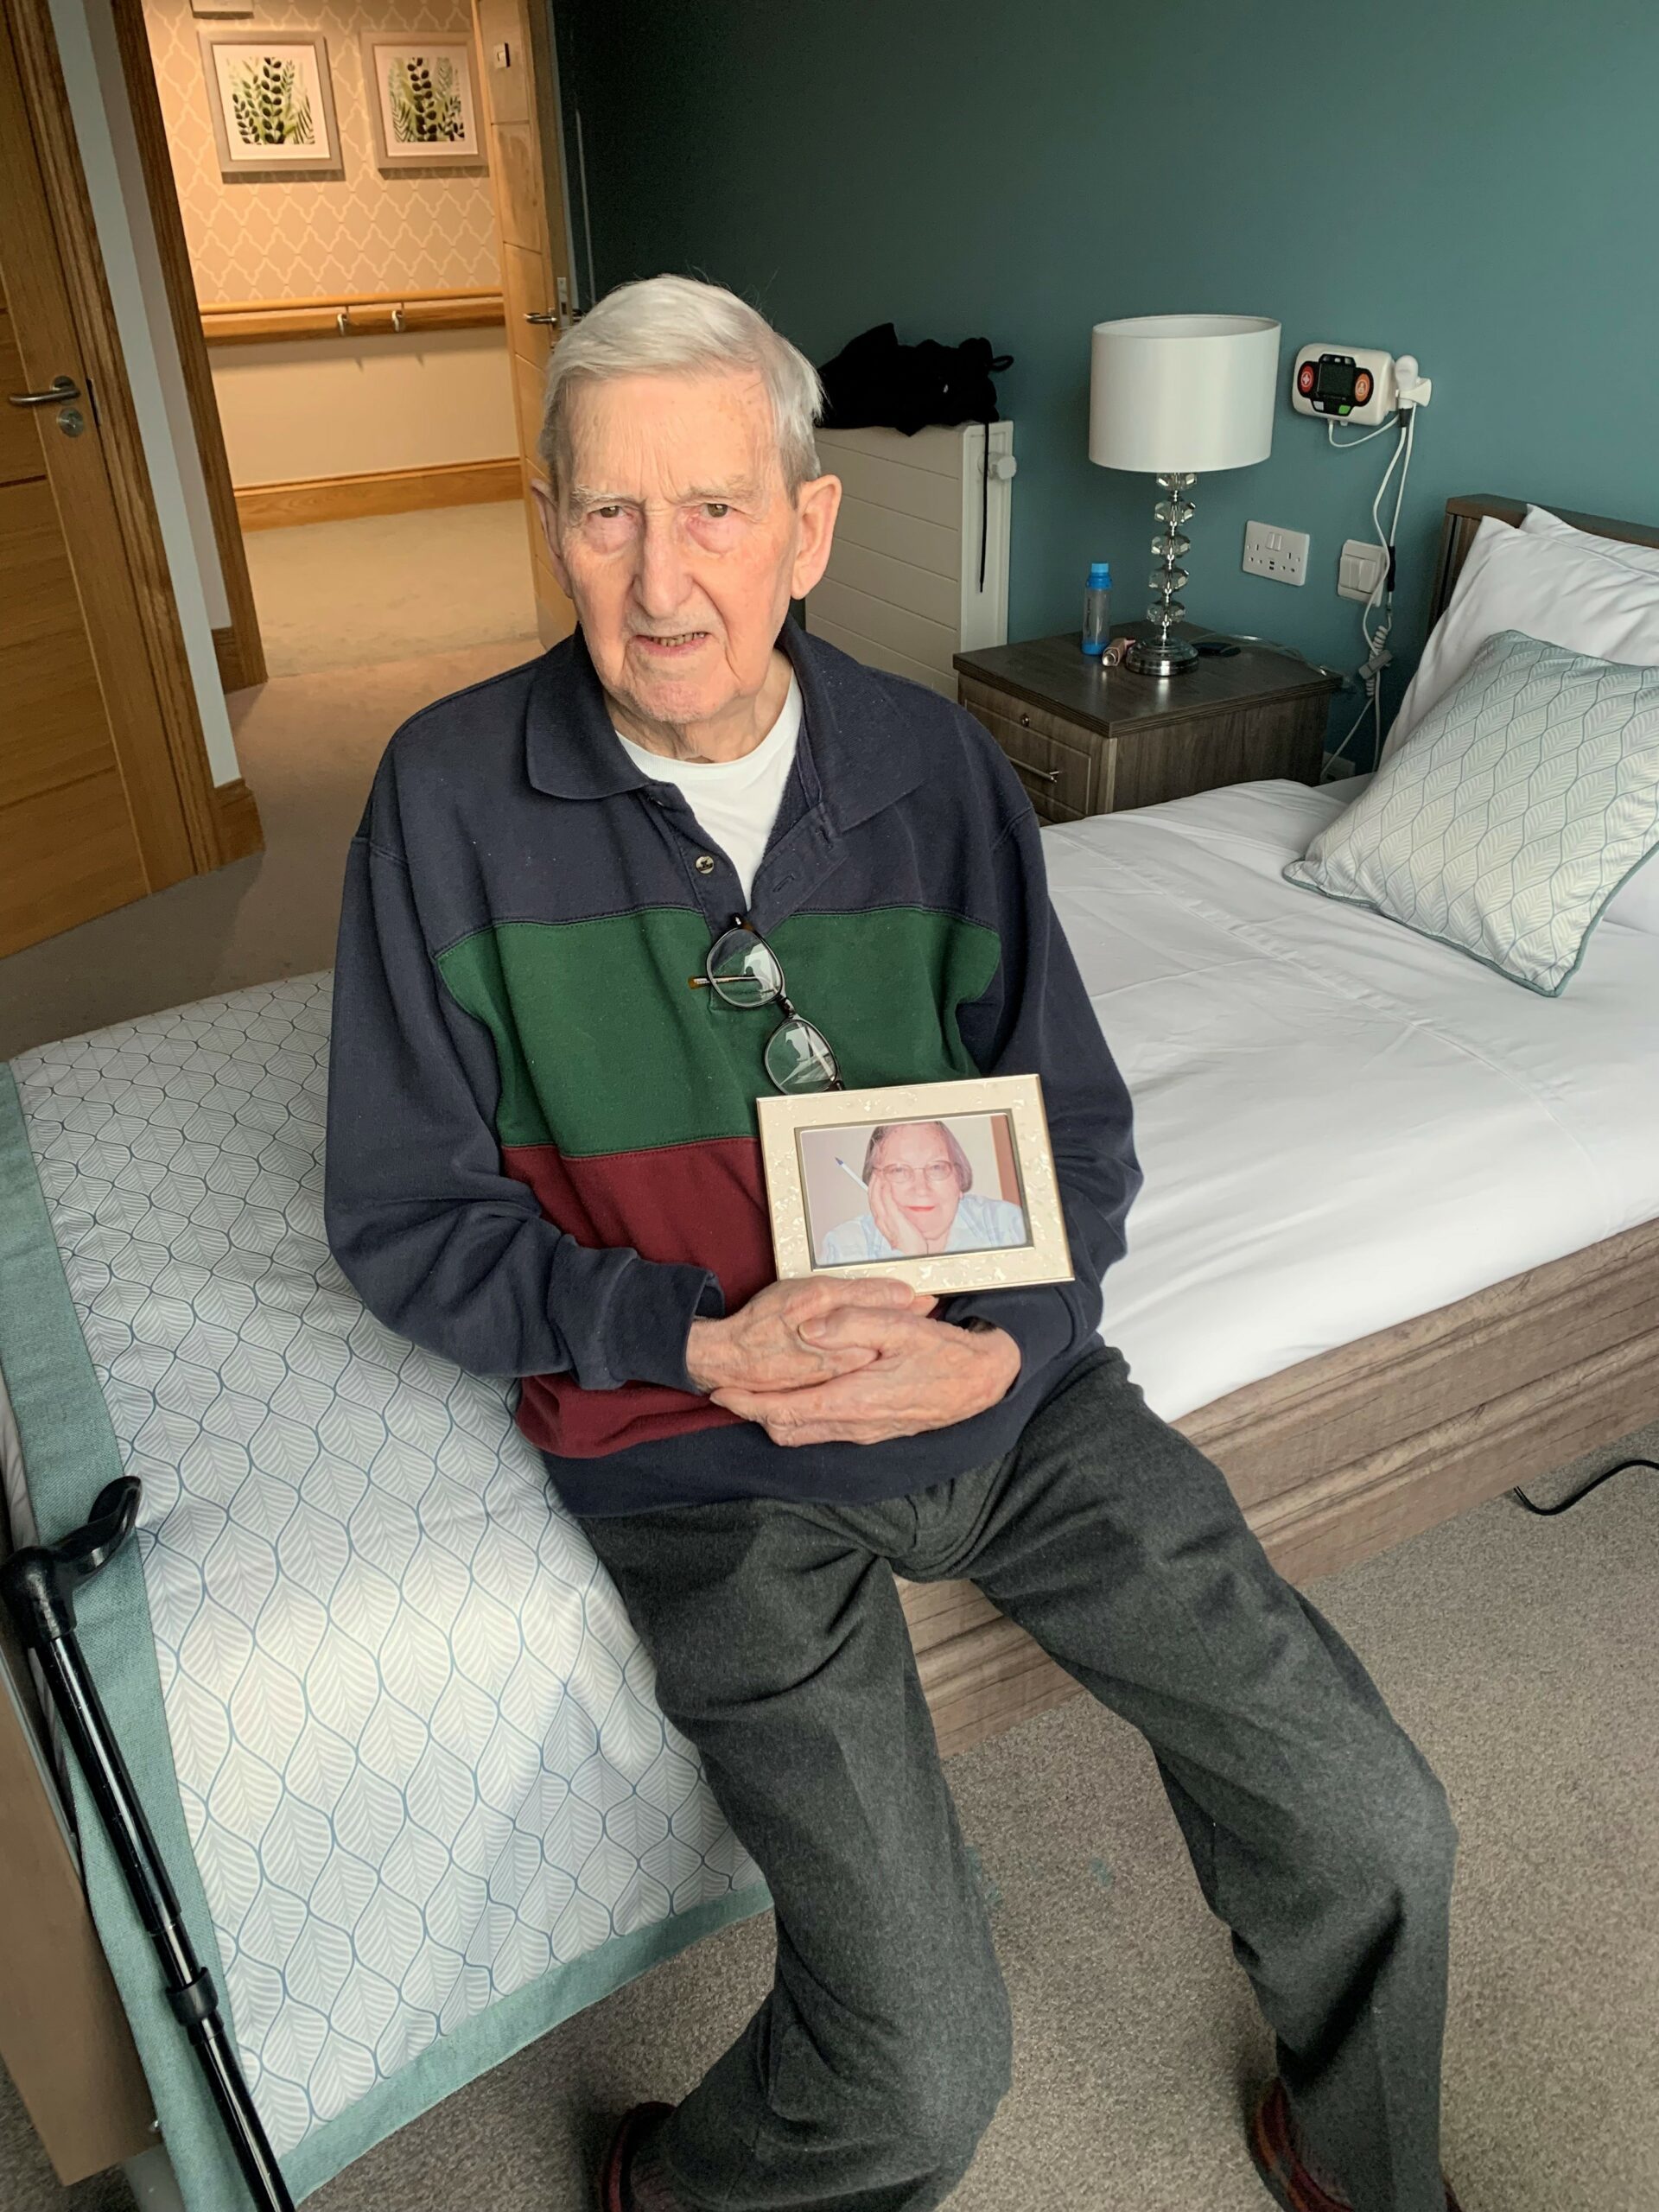 A male resident sat on his bed with a photo frame.